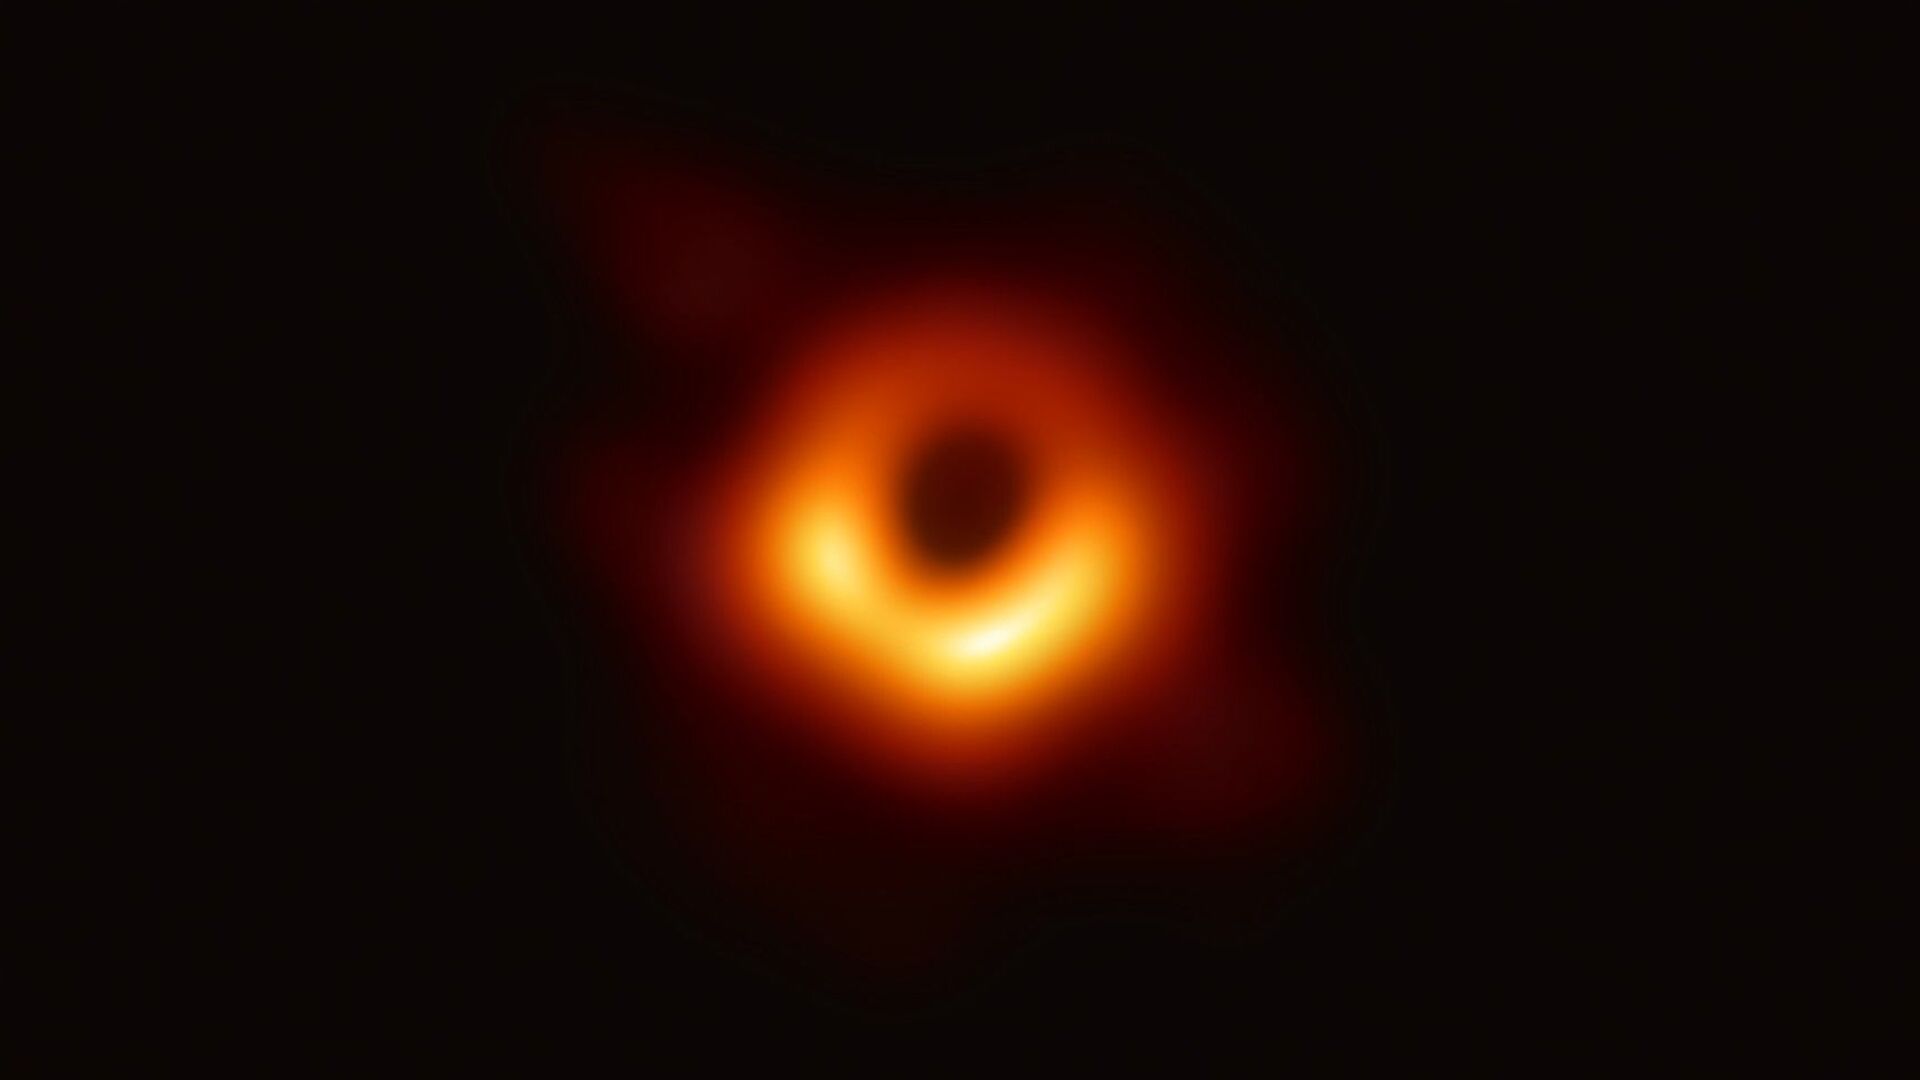 Using the Event Horizon Telescope, scientists obtained an image of the black hole at the center of galaxy M87, outlined by emission from hot gas swirling around it under the influence of strong gravity near its event horizon. - Sputnik International, 1920, 05.02.2022